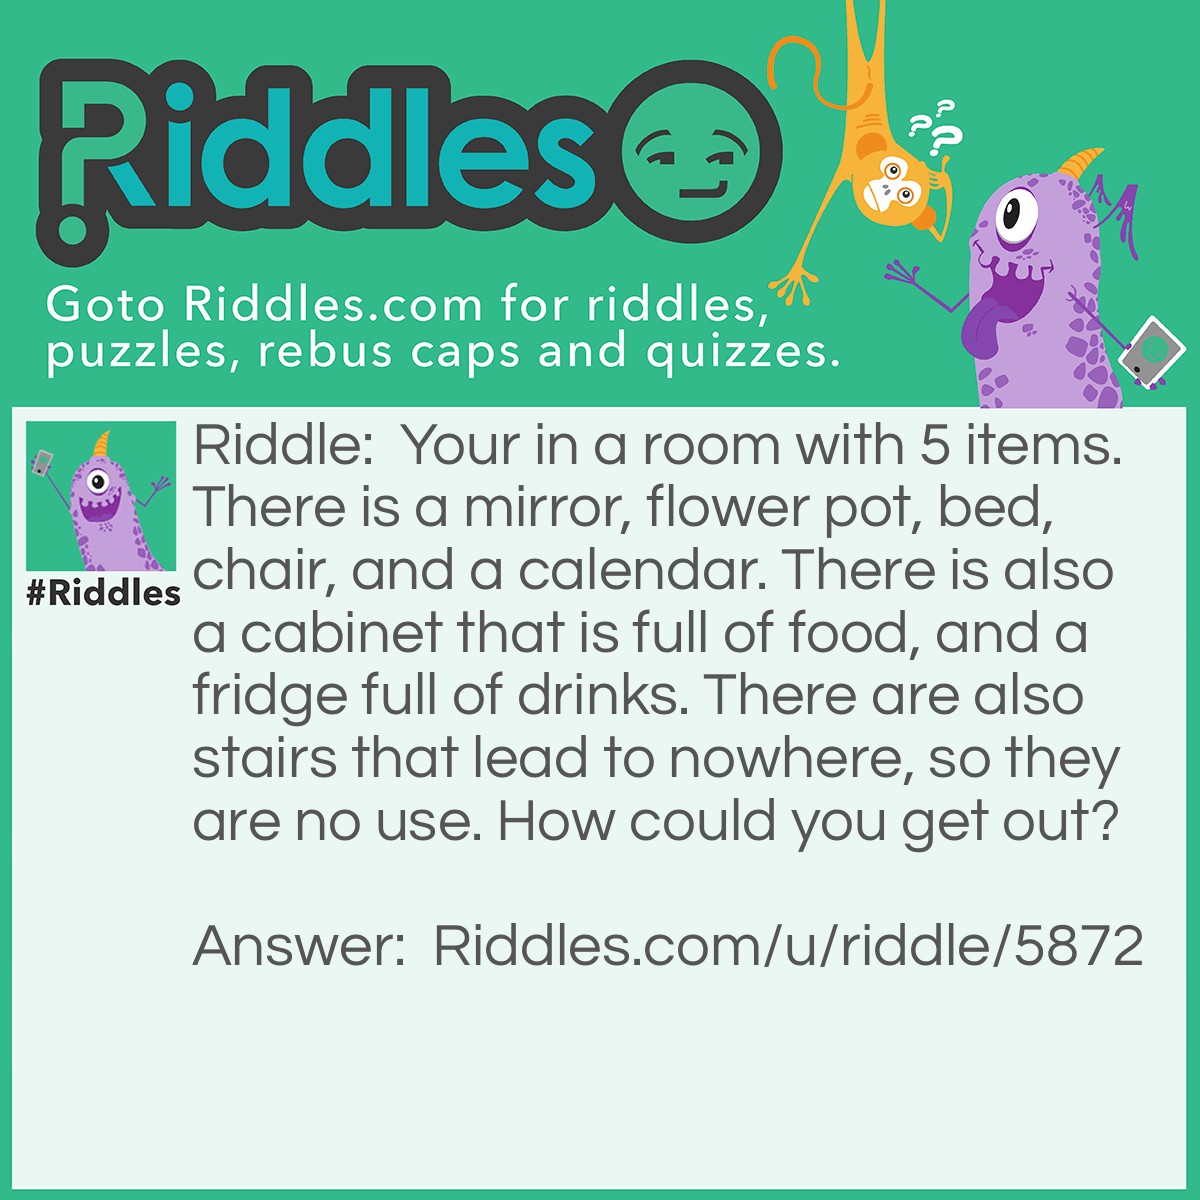 Riddle: Your in a room with 5 items. There is a mirror, flower pot, bed, chair, and a calendar. There is also a cabinet that is full of food, and a fridge full of drinks. There are also stairs that lead to nowhere, so they are no use. How could you get out? Answer: You just walk out the door!